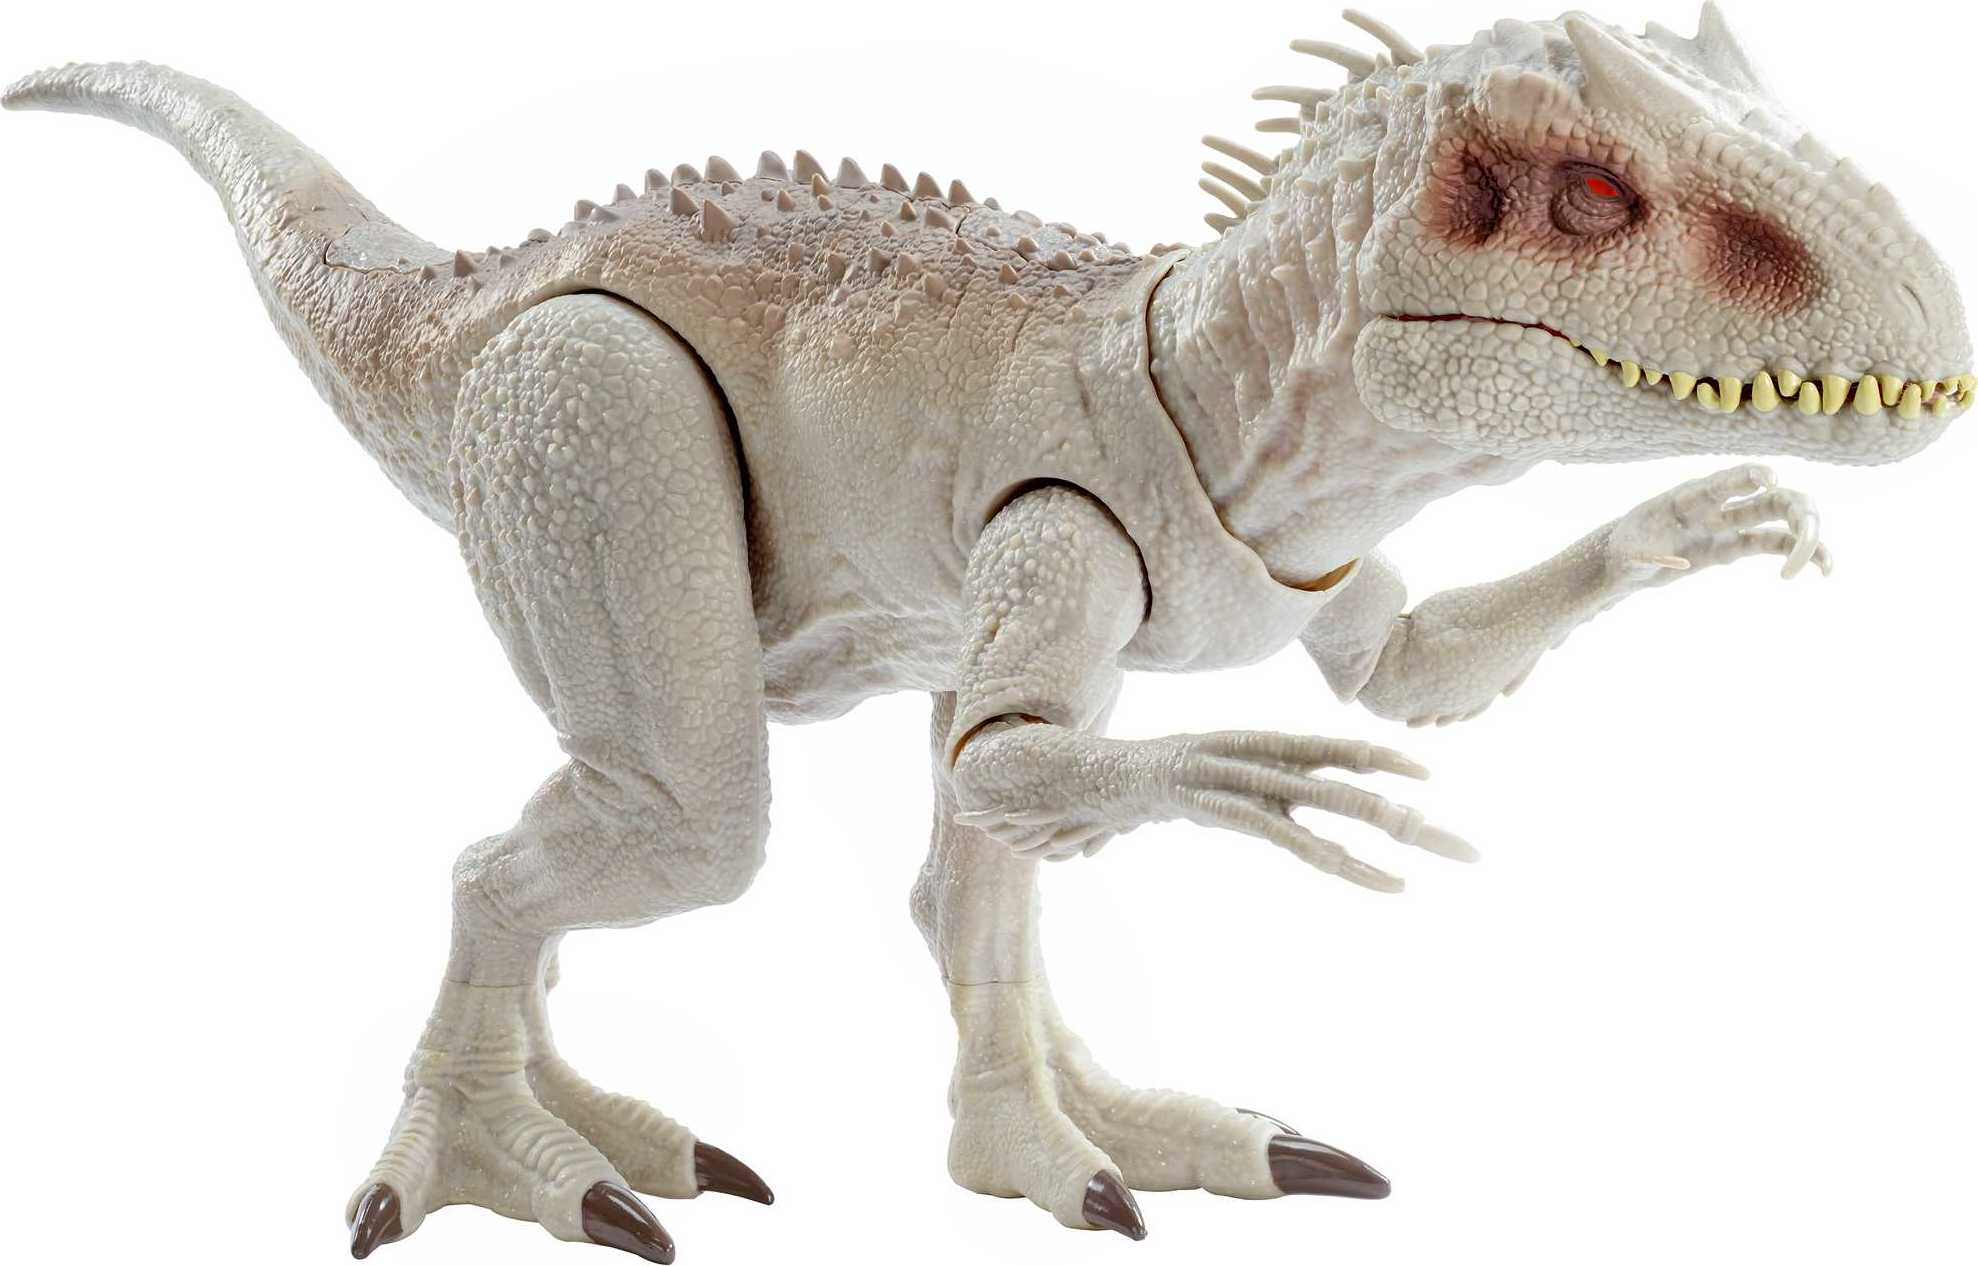 Jurassic World Destroy ‘N Devour Indominus Rex Dinosaur Action Figure with Motion, Sound and Eating Feature, Toy Gift - image 1 of 8